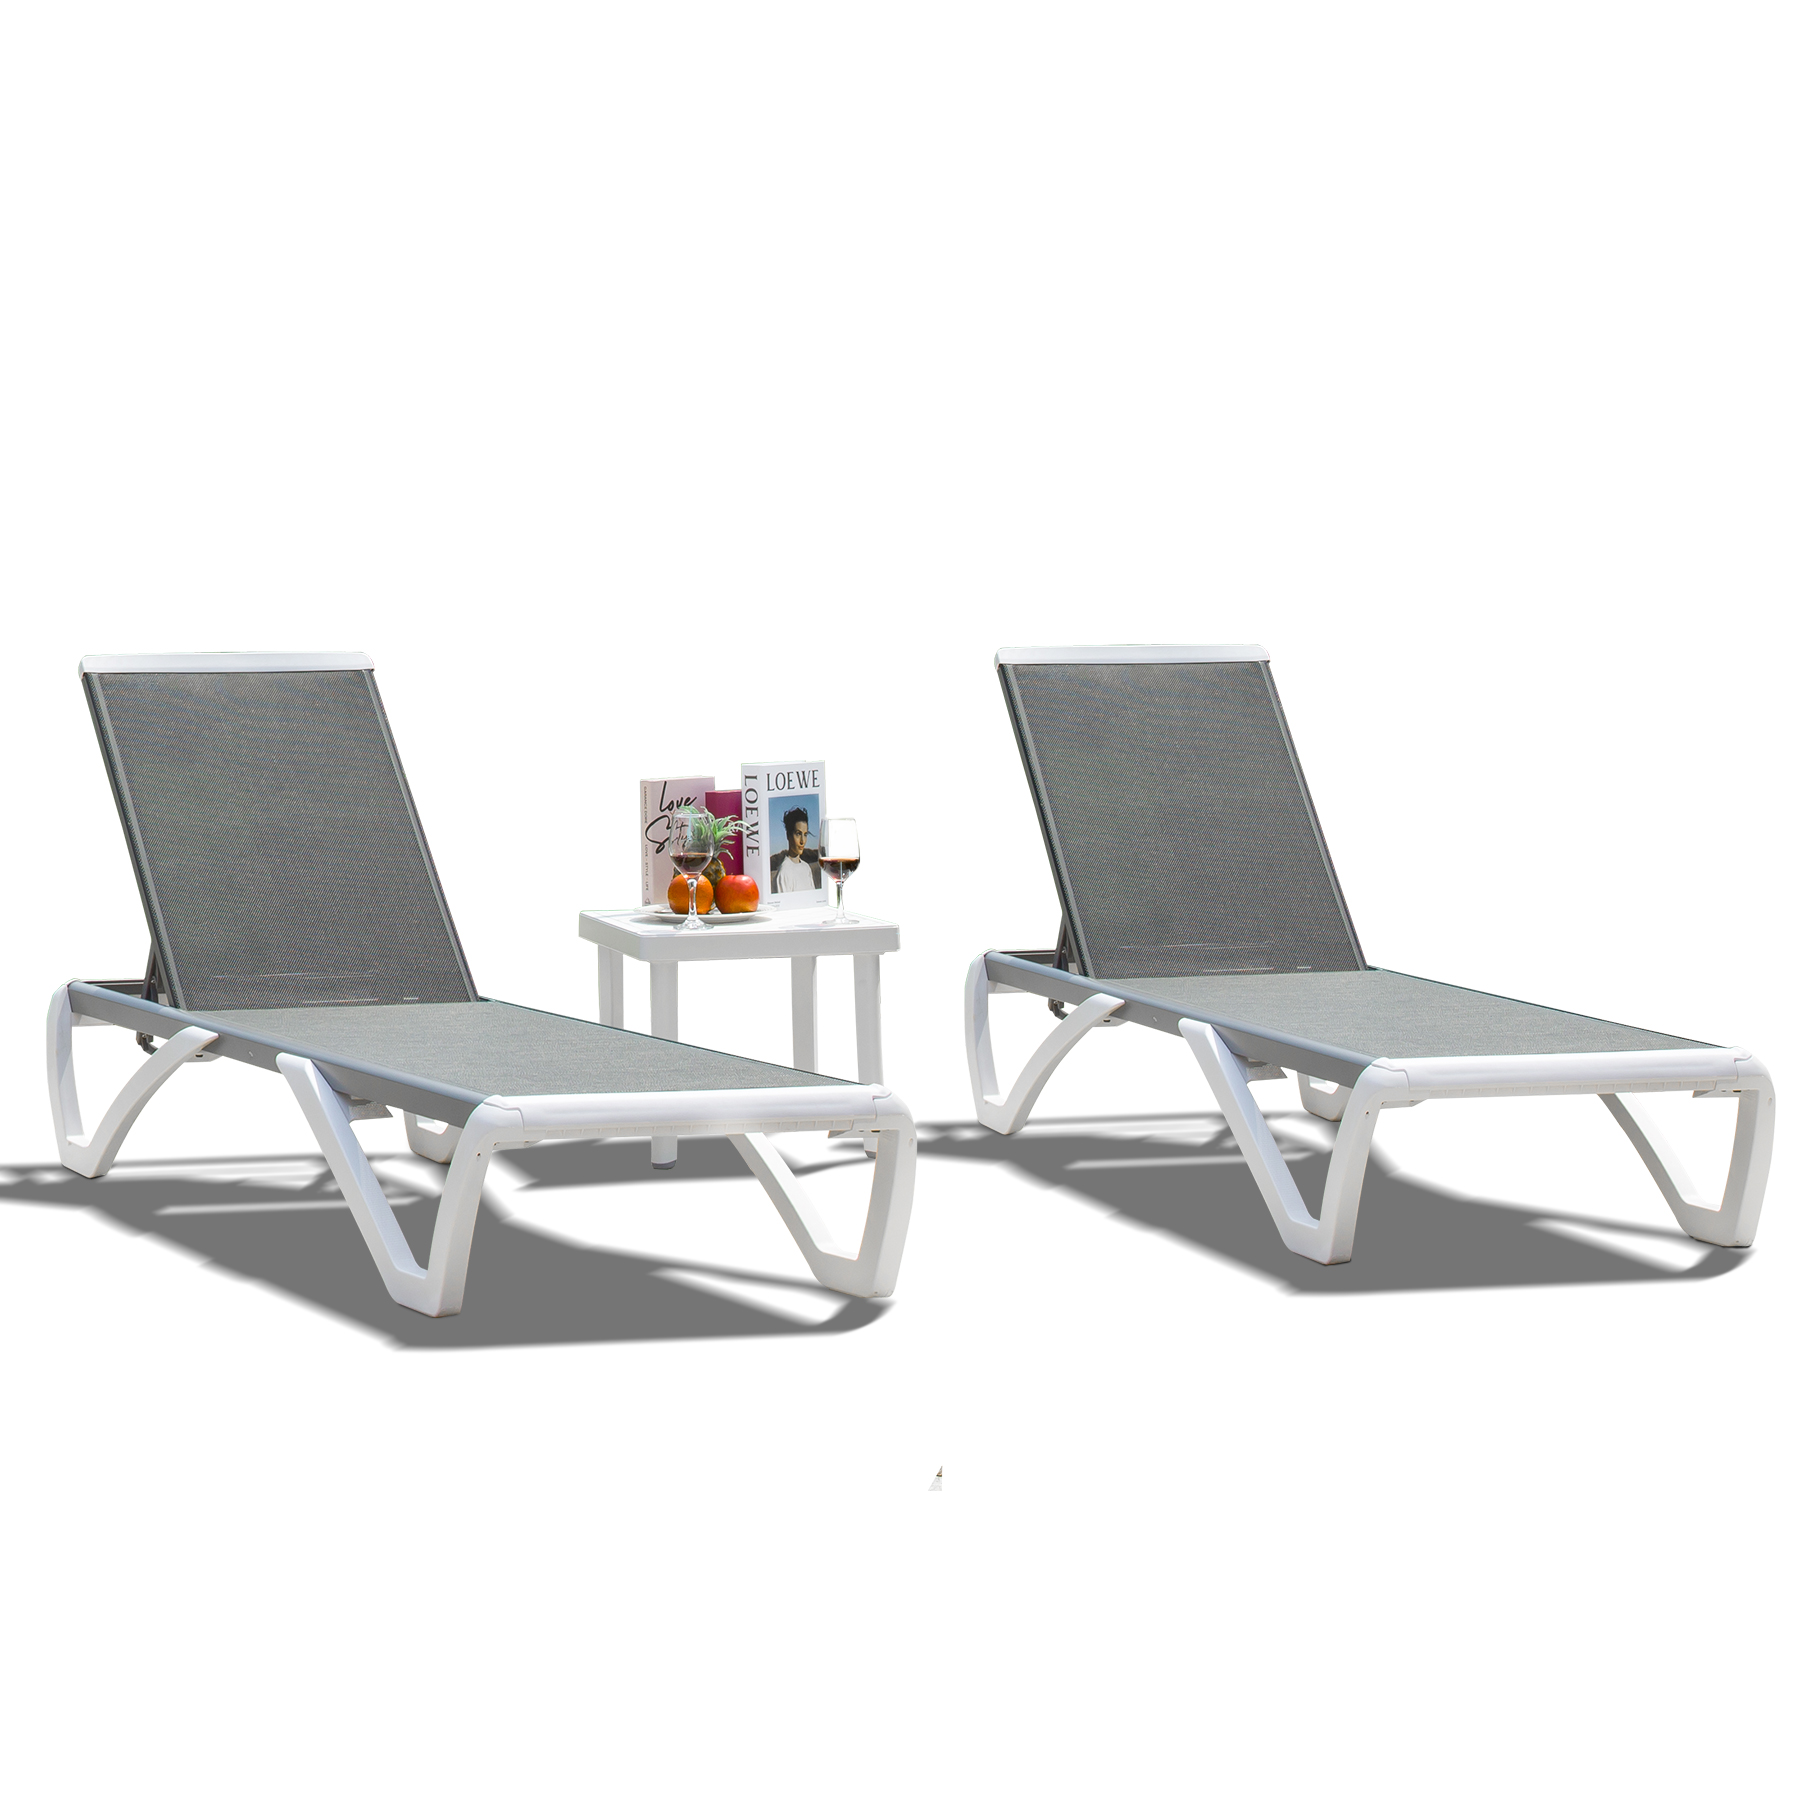 Domi Patio Chaise Lounge Chair Set of 3,Outdoor Aluminum Polypropylene Sunbathing Chair with Adjustable Backrest,Side Table,for Beach,Yard,Balcony,Poolside(2 Grey Chairs W/Table) - image 3 of 8